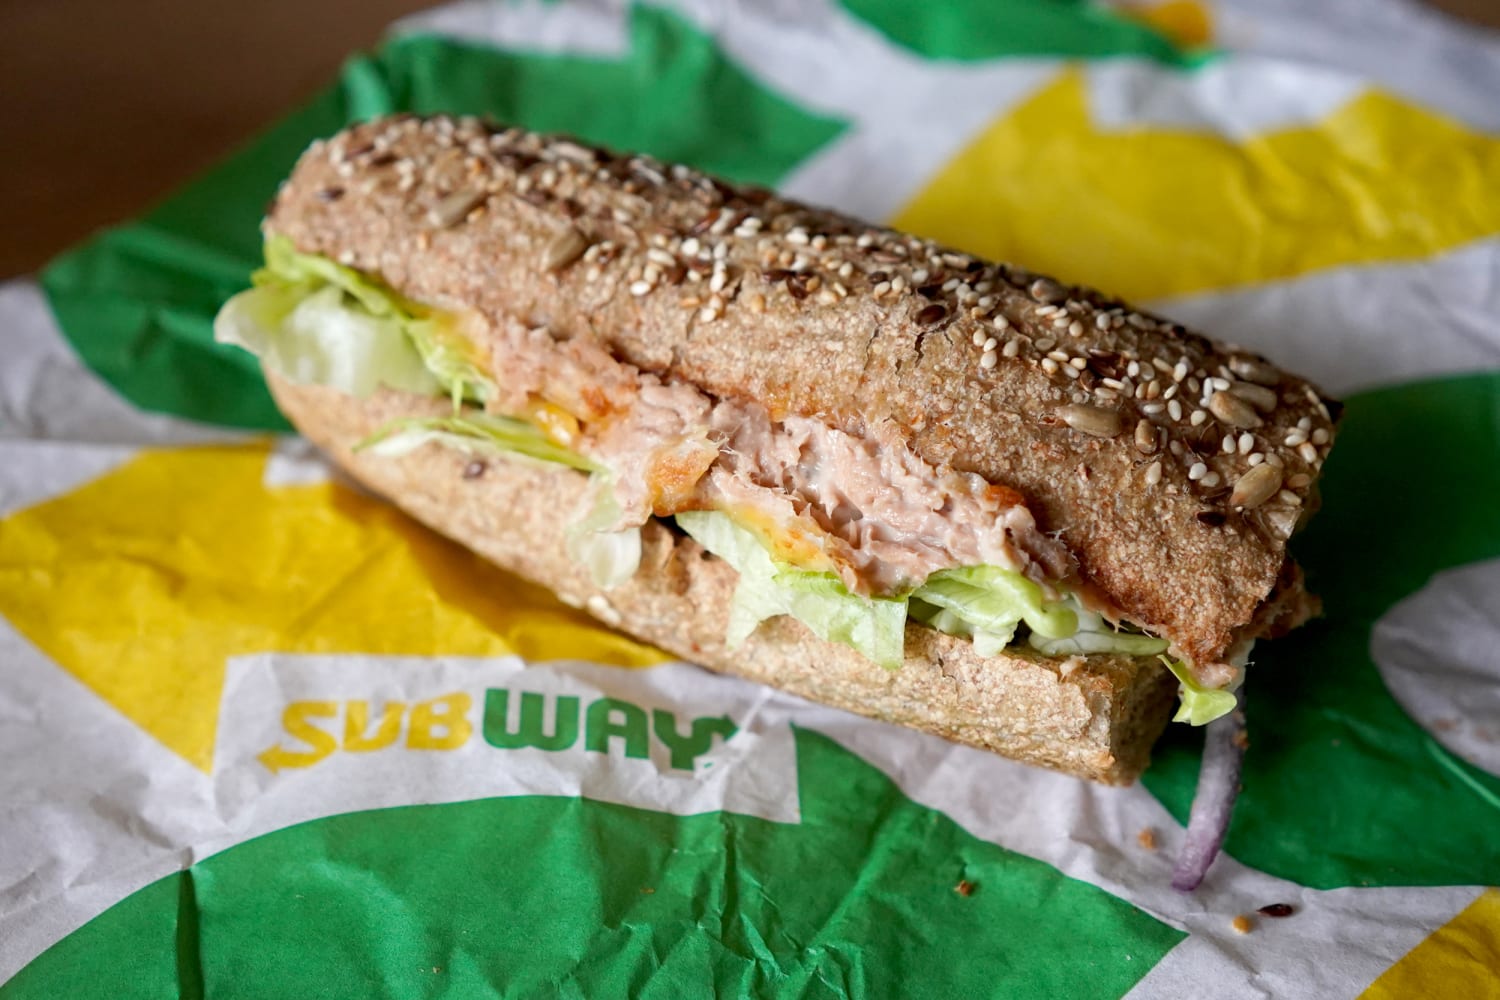 If Subway's sandwiches have the same ingredients as the ones I